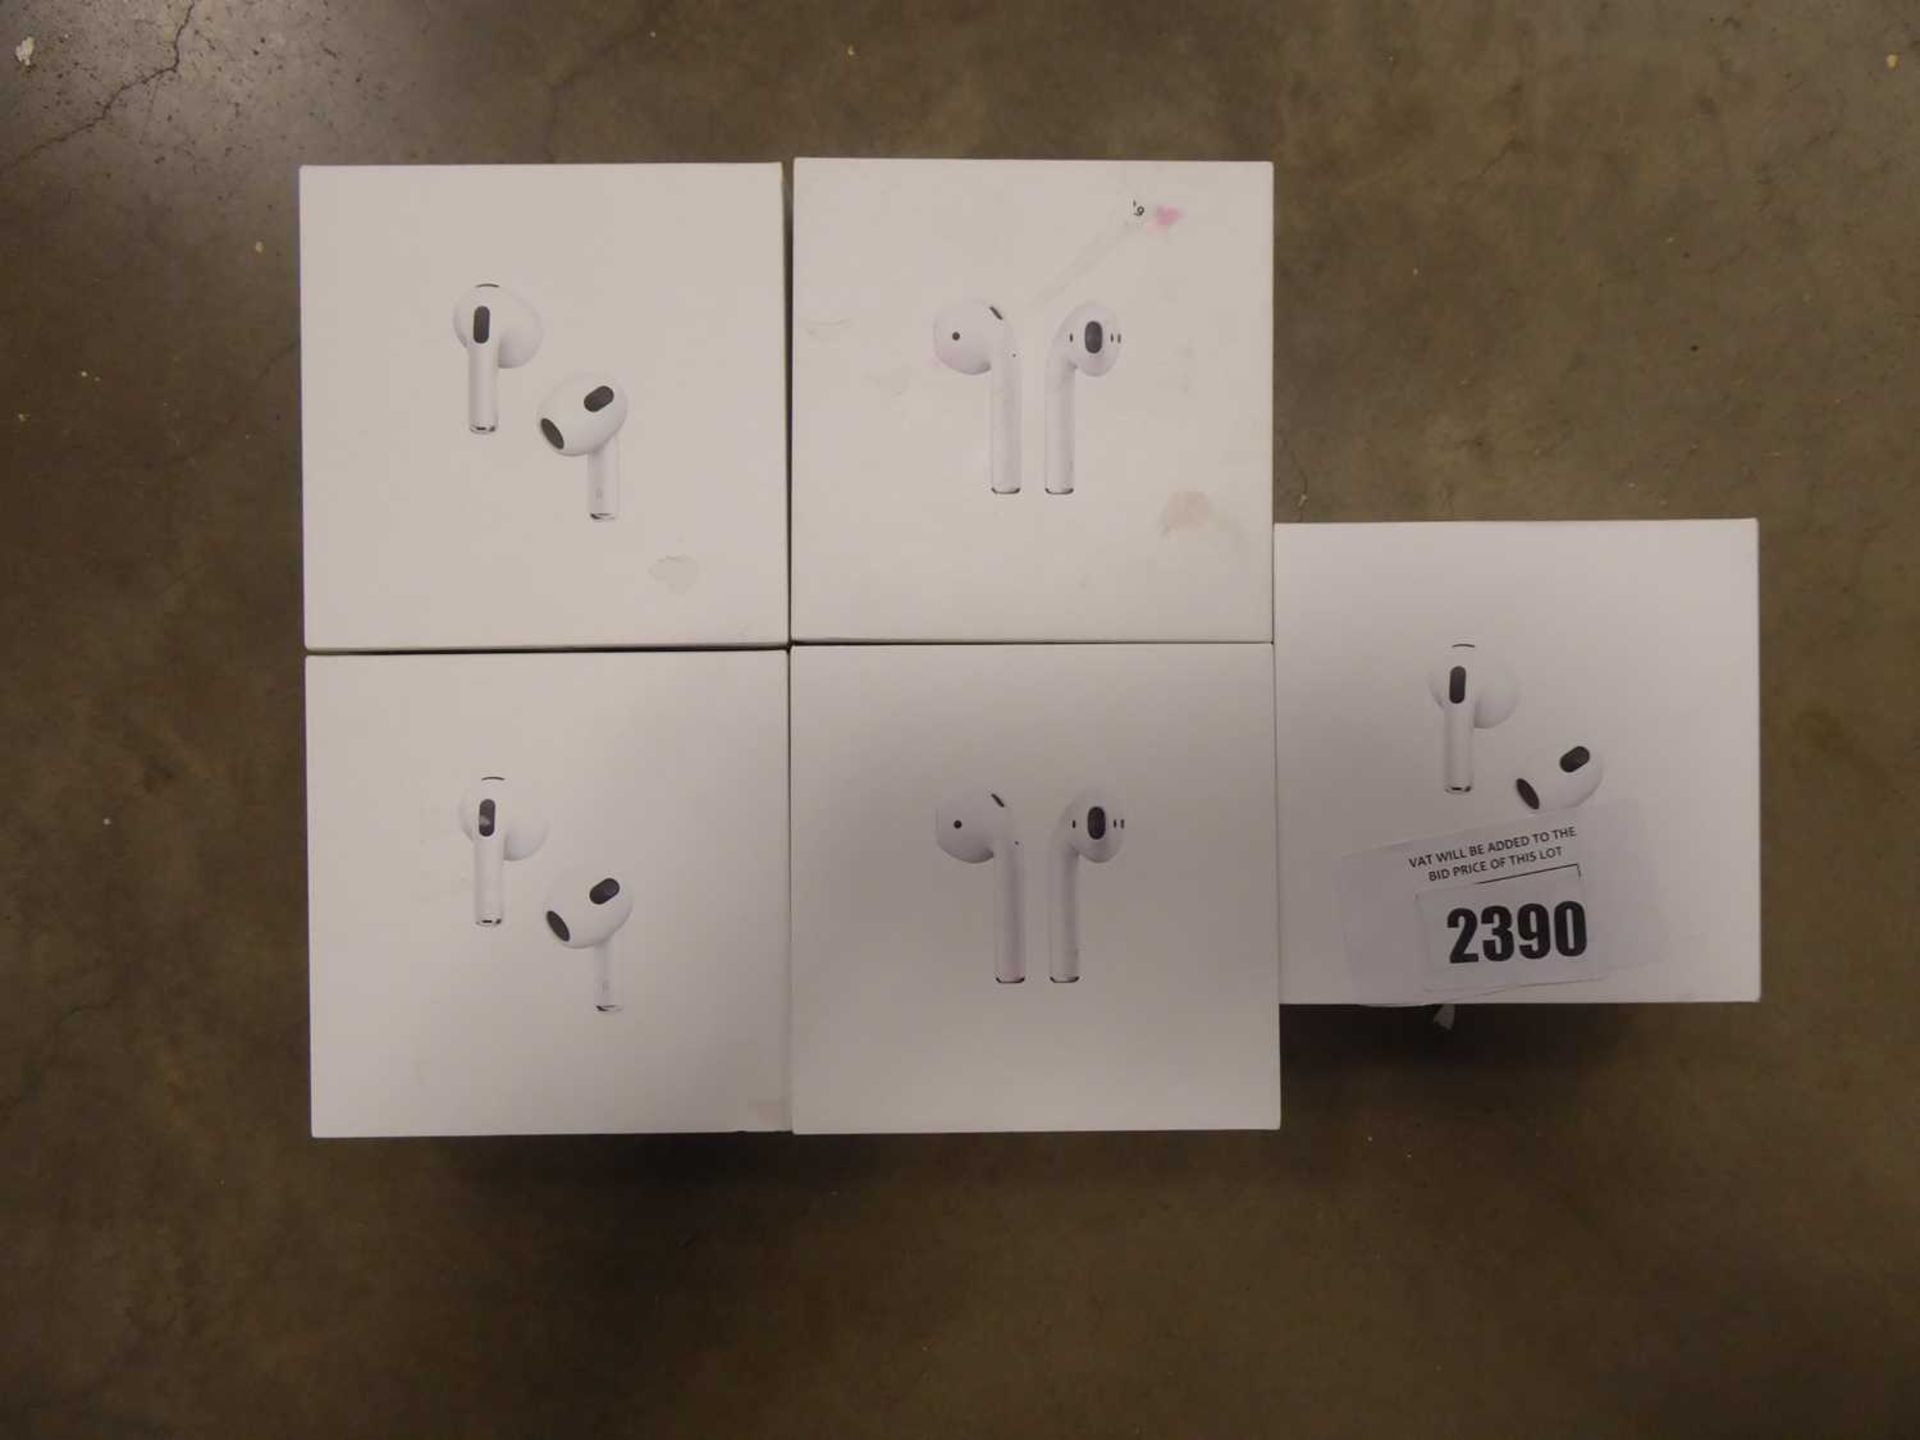 +VAT 2 Apple AirPods 2nd gen. plus 3 Apple AirPods 3rd gen. (possibly linked to account)